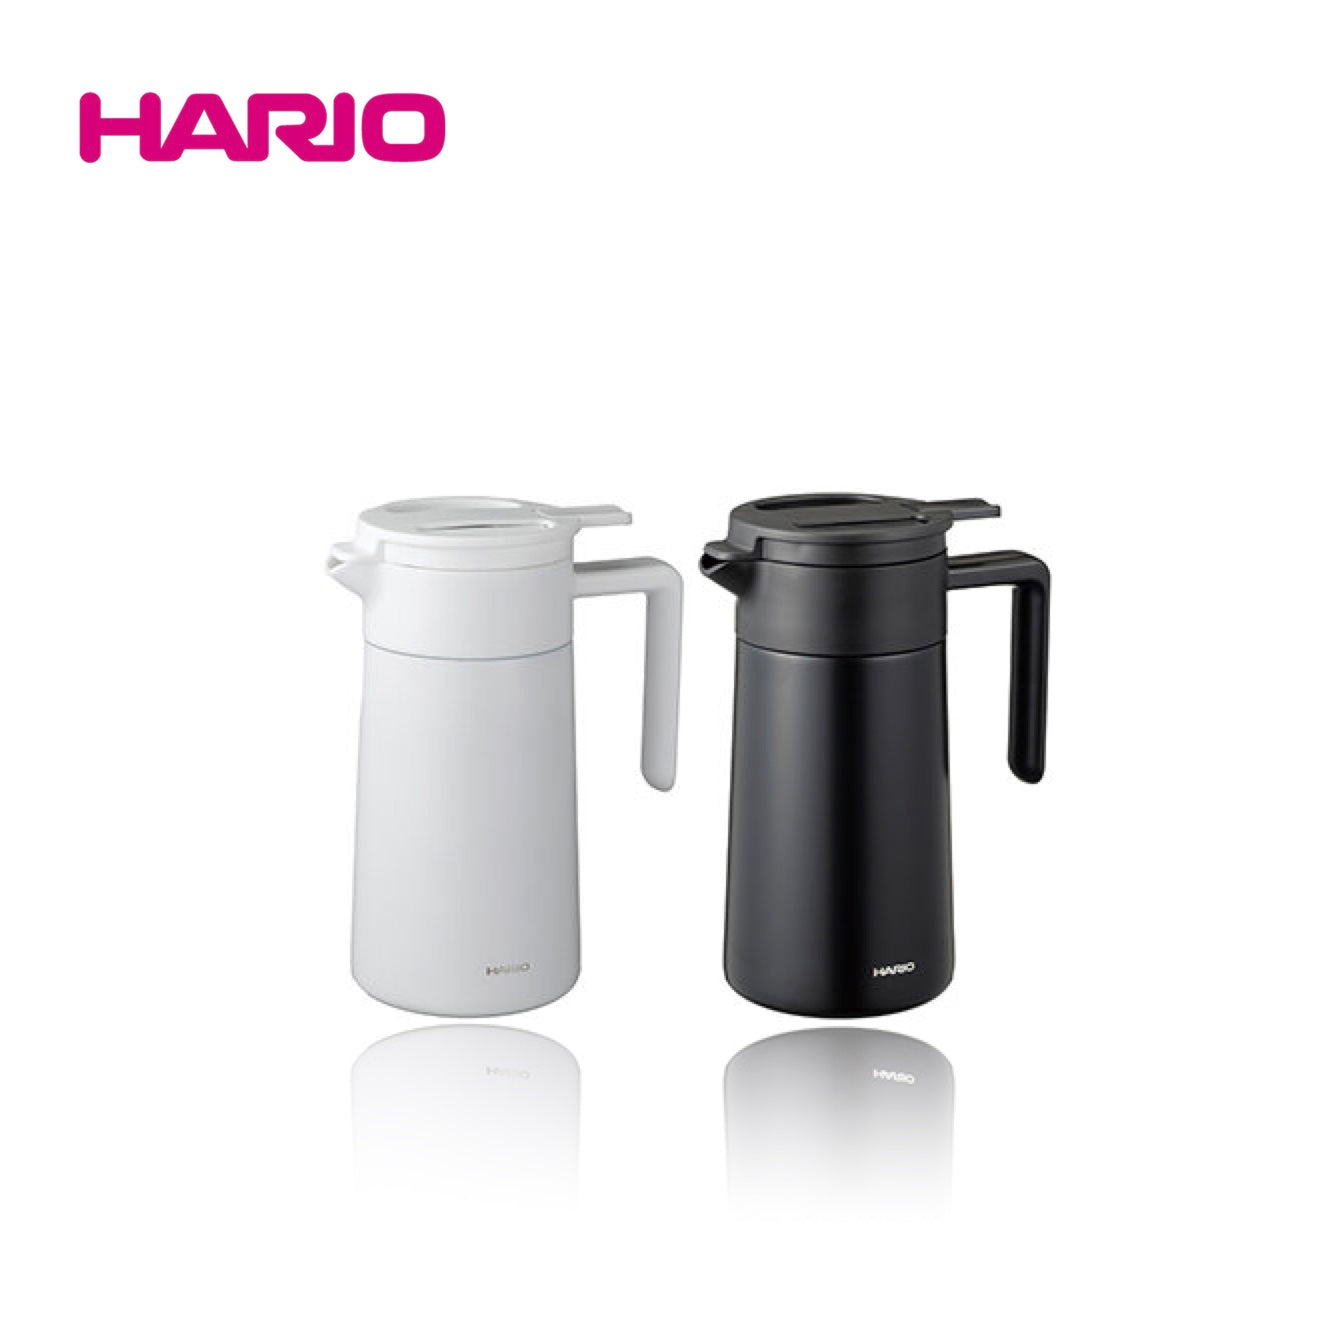 Hario Double-Walled Thermal Pot With Ceramic Coating